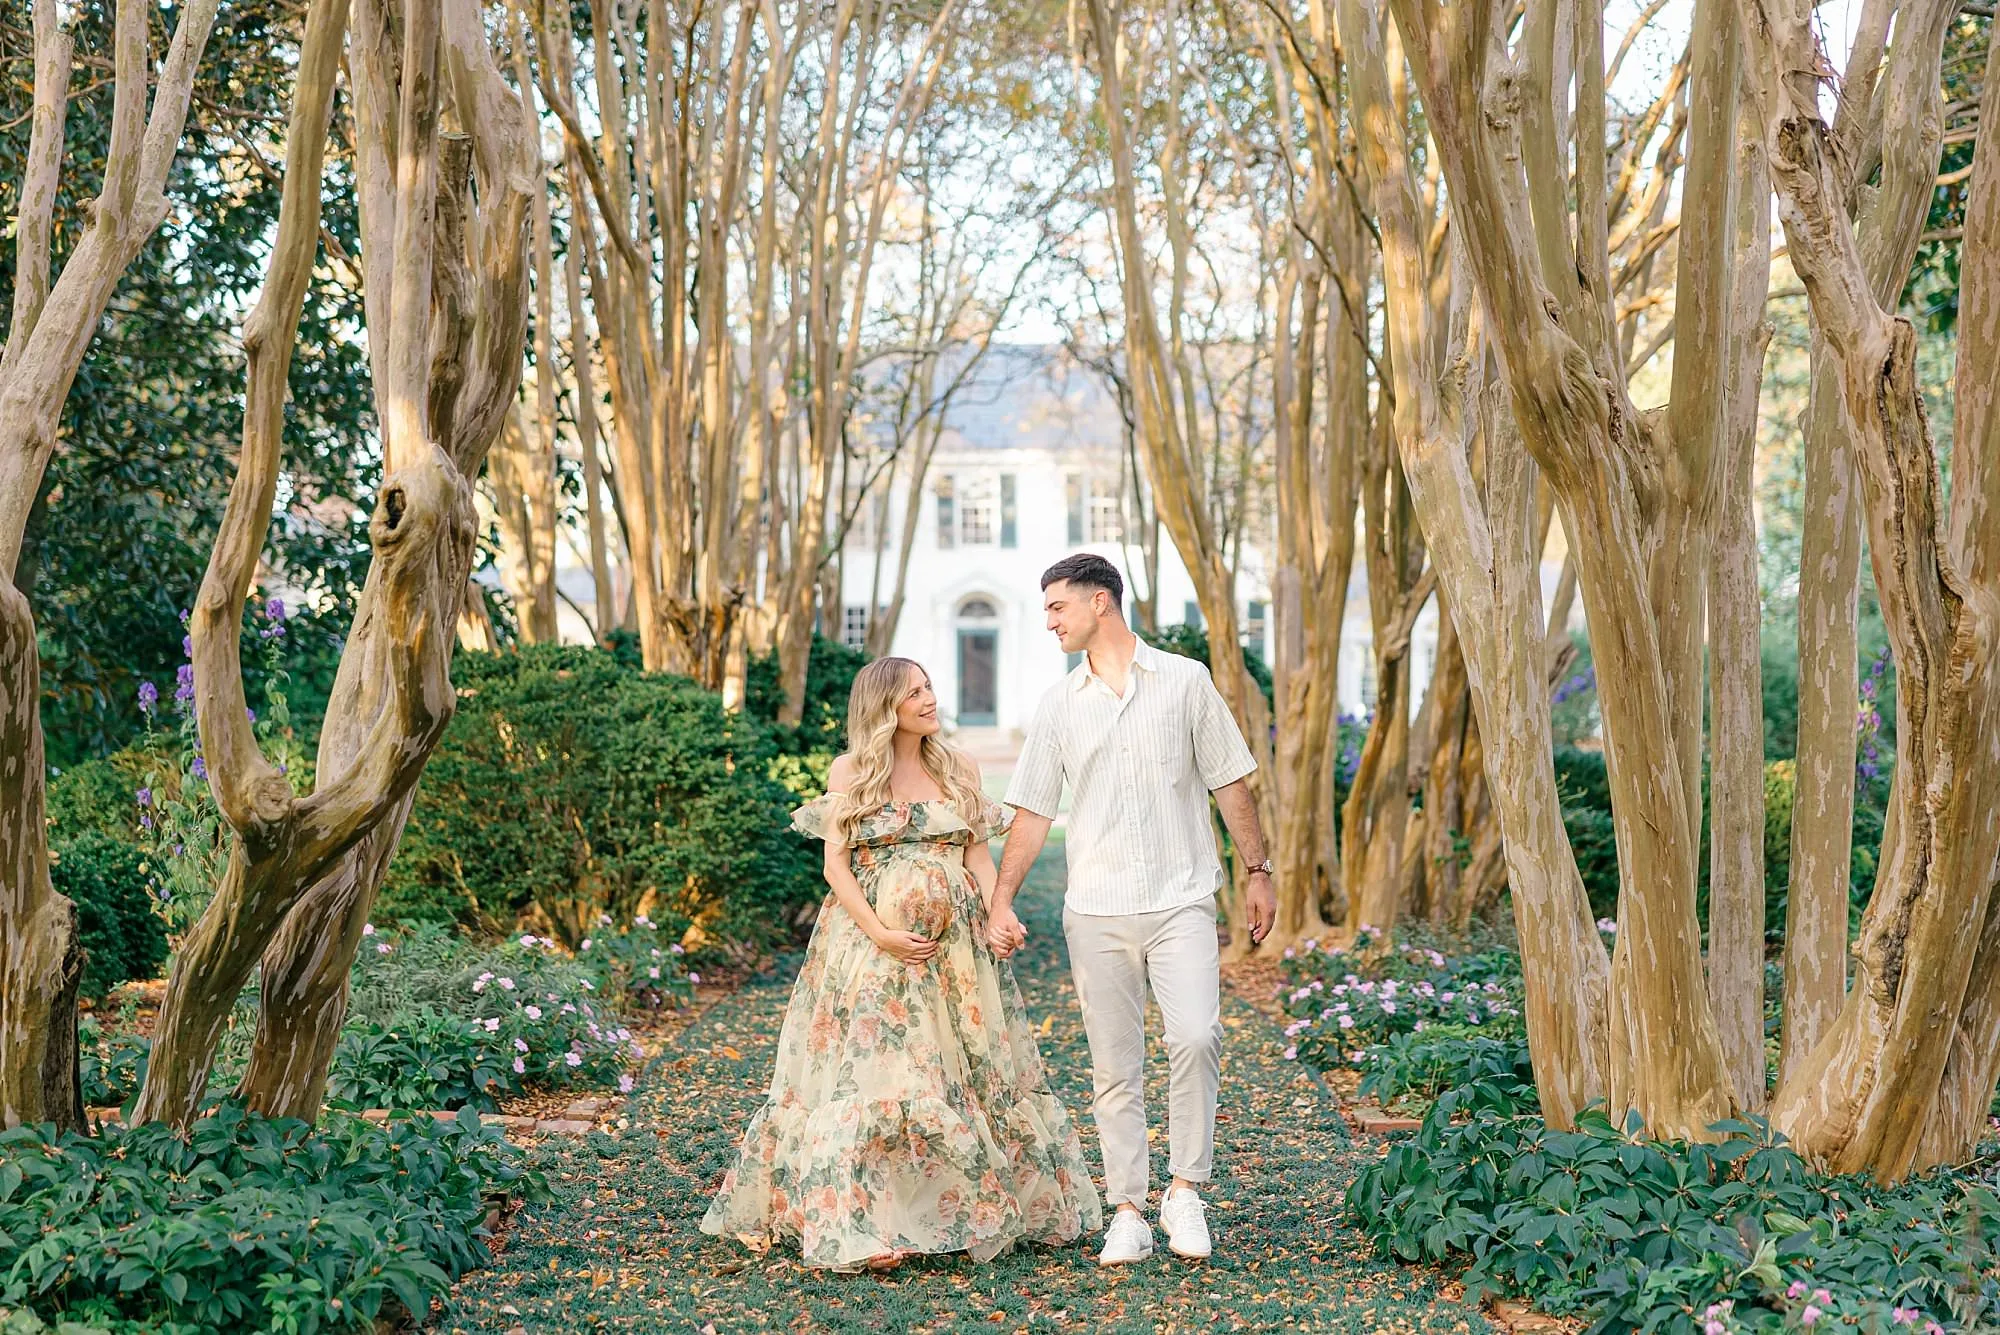 Couple walking through crape myrtle trees for RVA maternity session